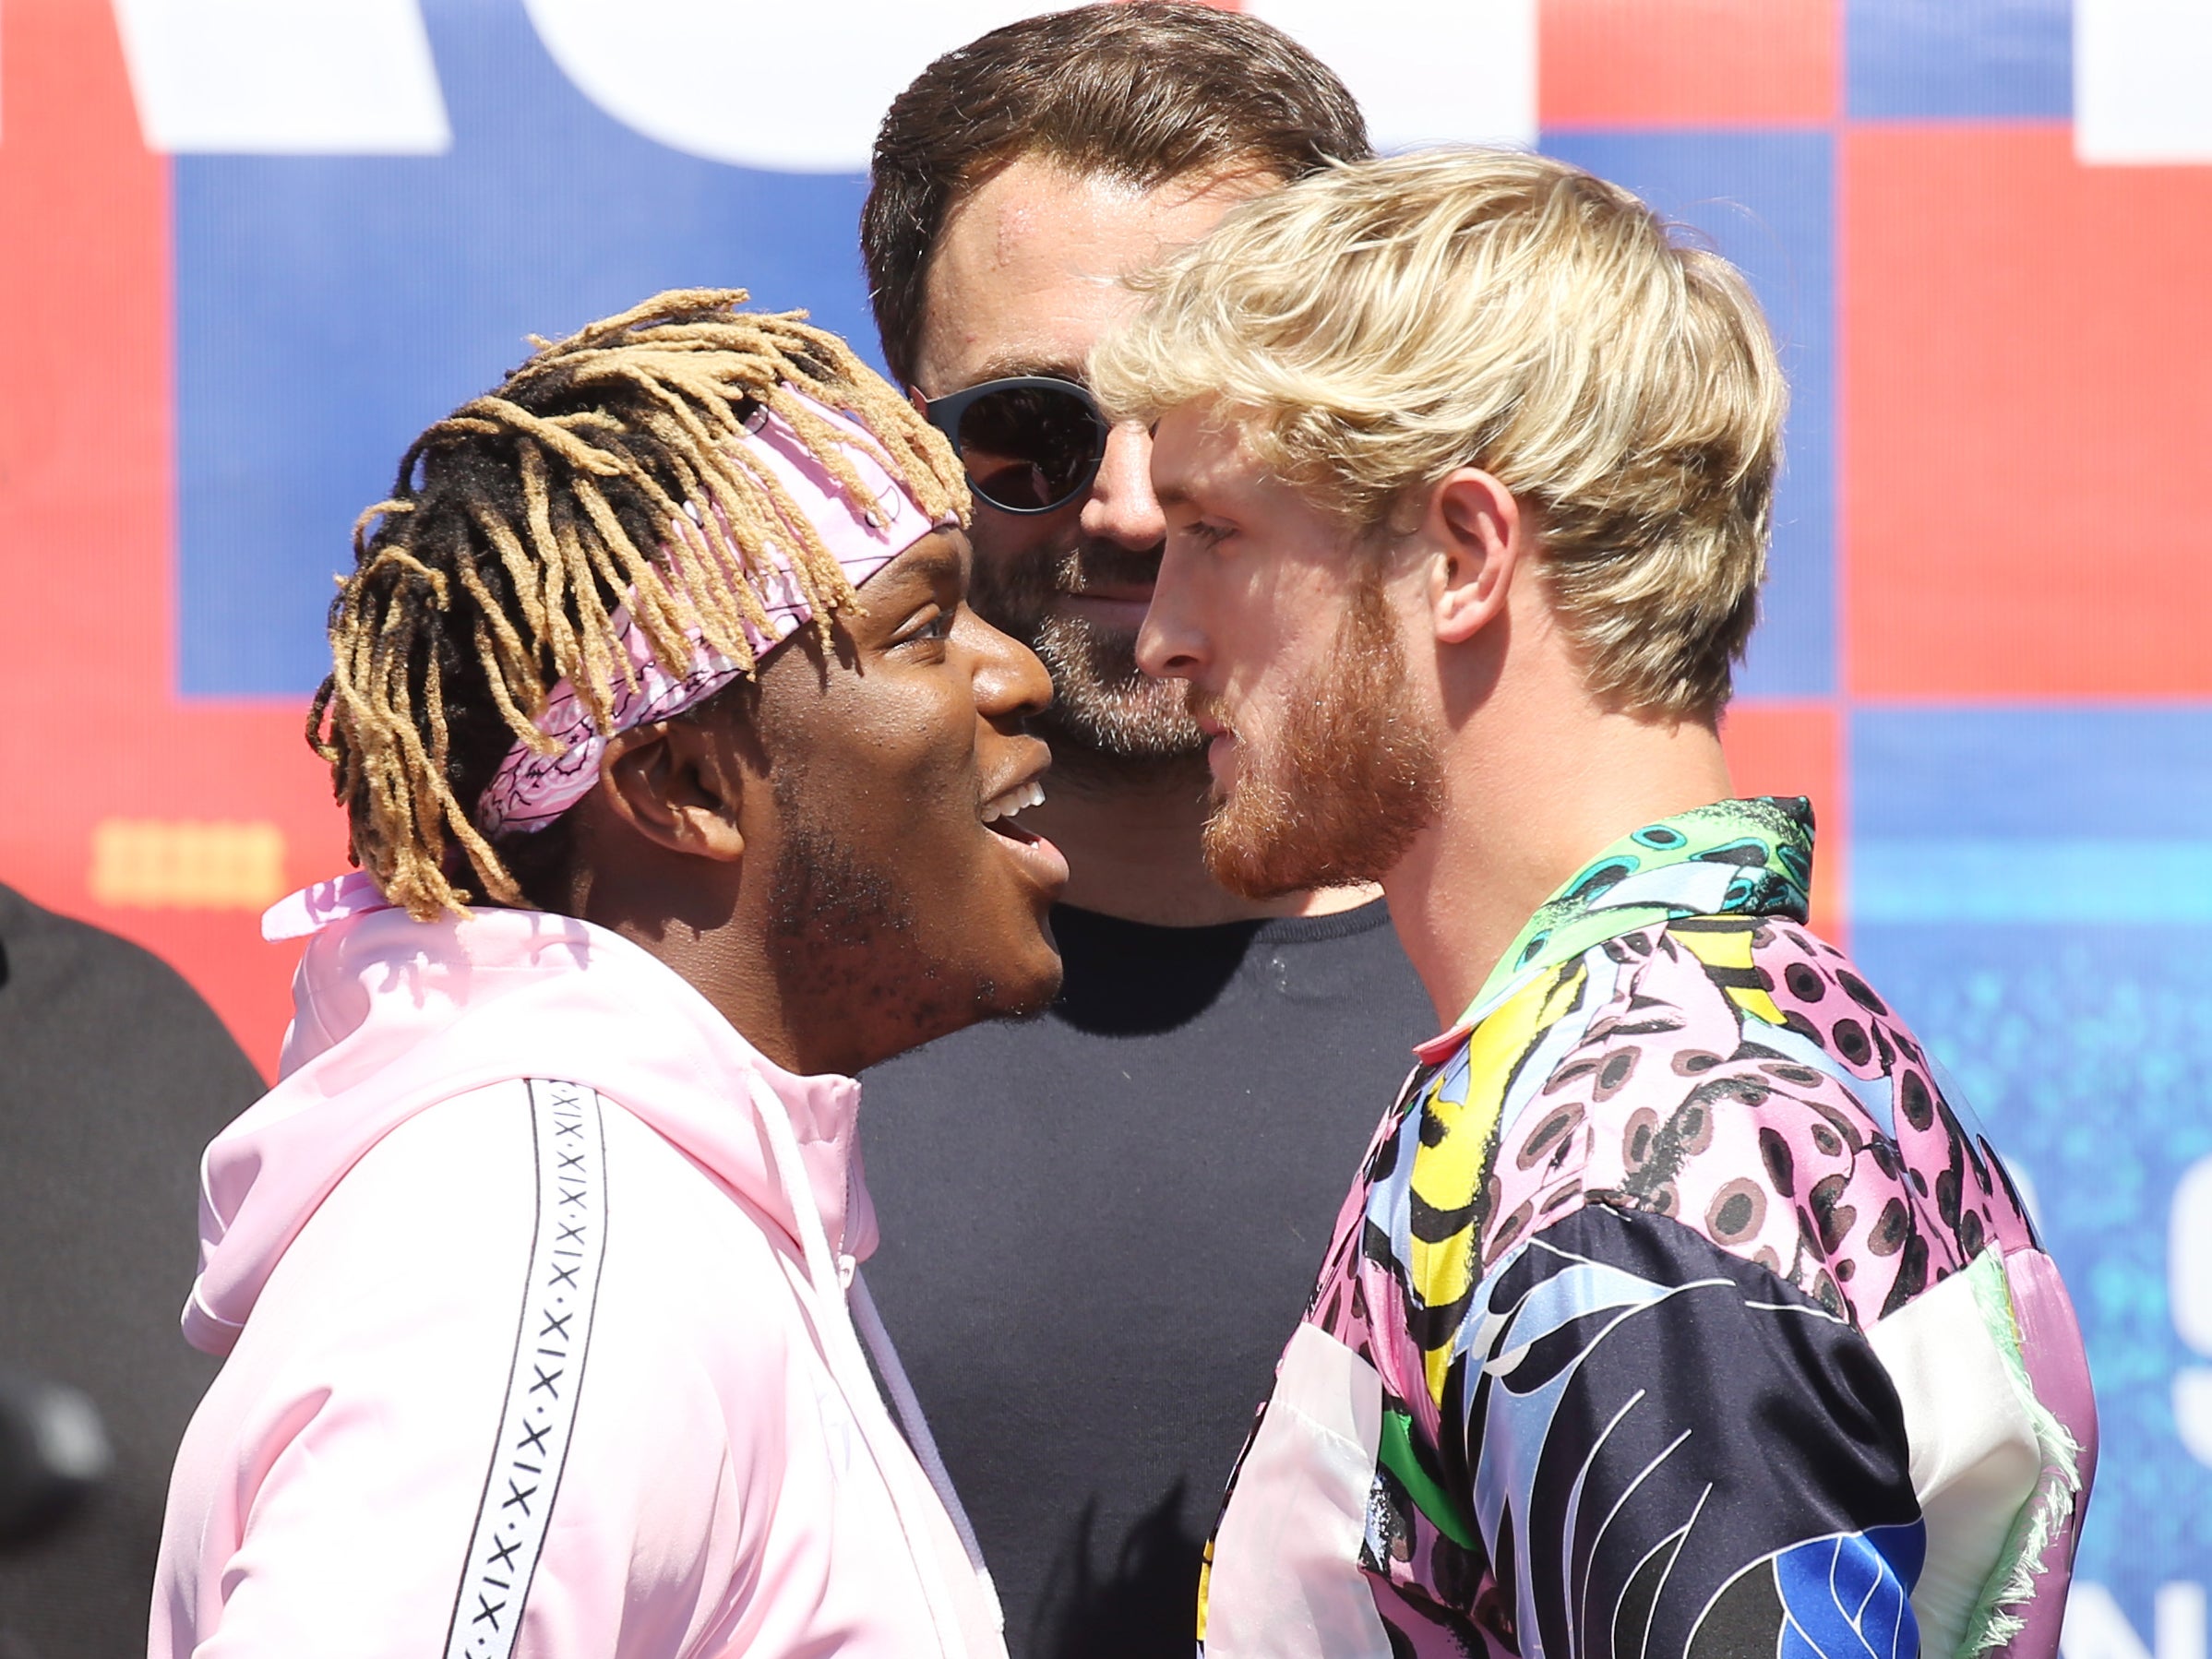 KSI vs Logan Paul rematch press conference - live stream: Watch as YouTube stars come face to face again ahead of fight